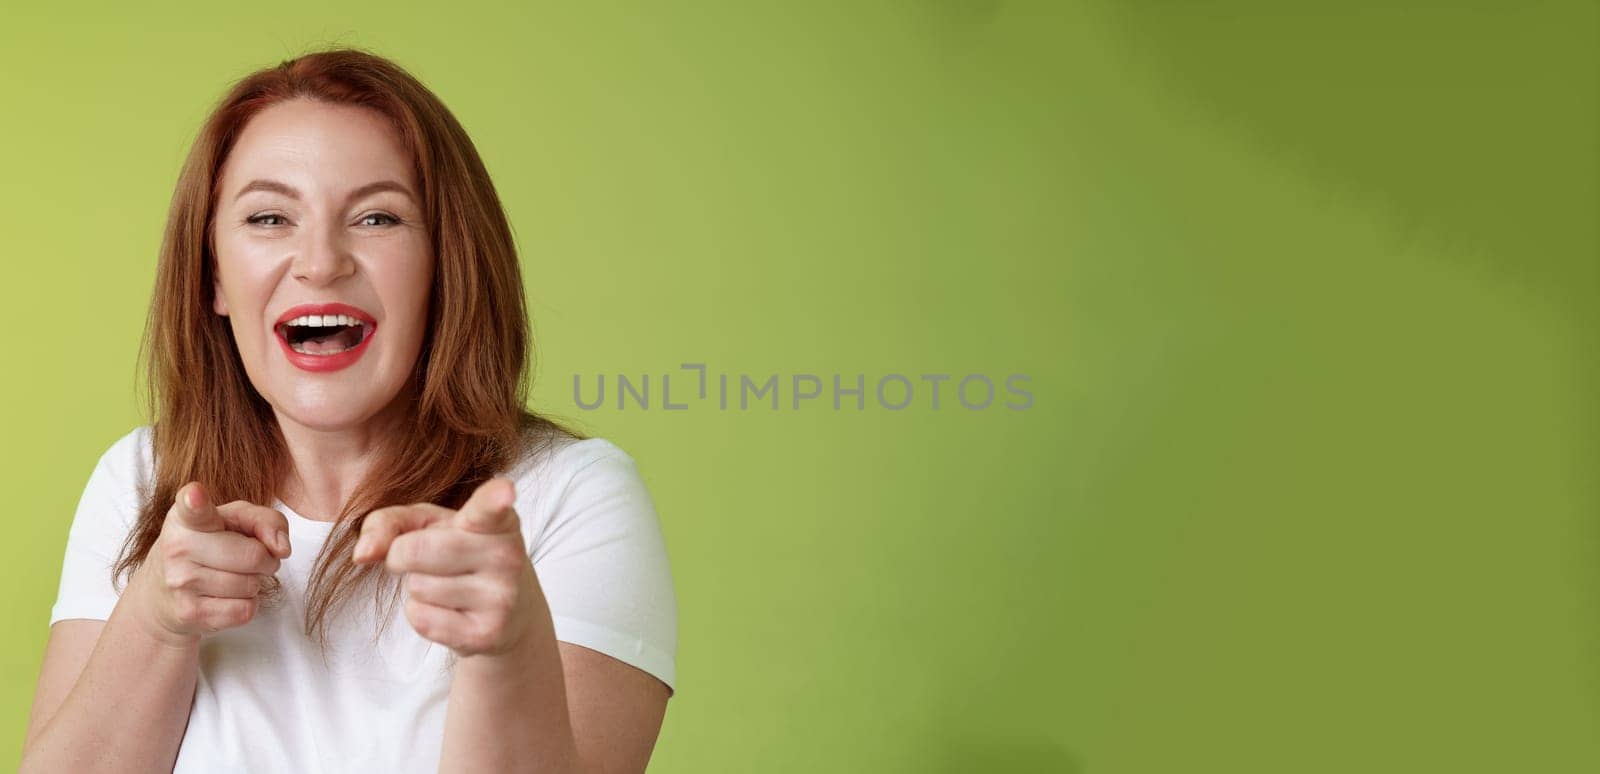 You did best. Friendly joyful enthusiastic redhead ginger middle-aged female pointing index fingers camera finger pistol gesture smiling broadly congratulate cheer coworker stand green background by Benzoix